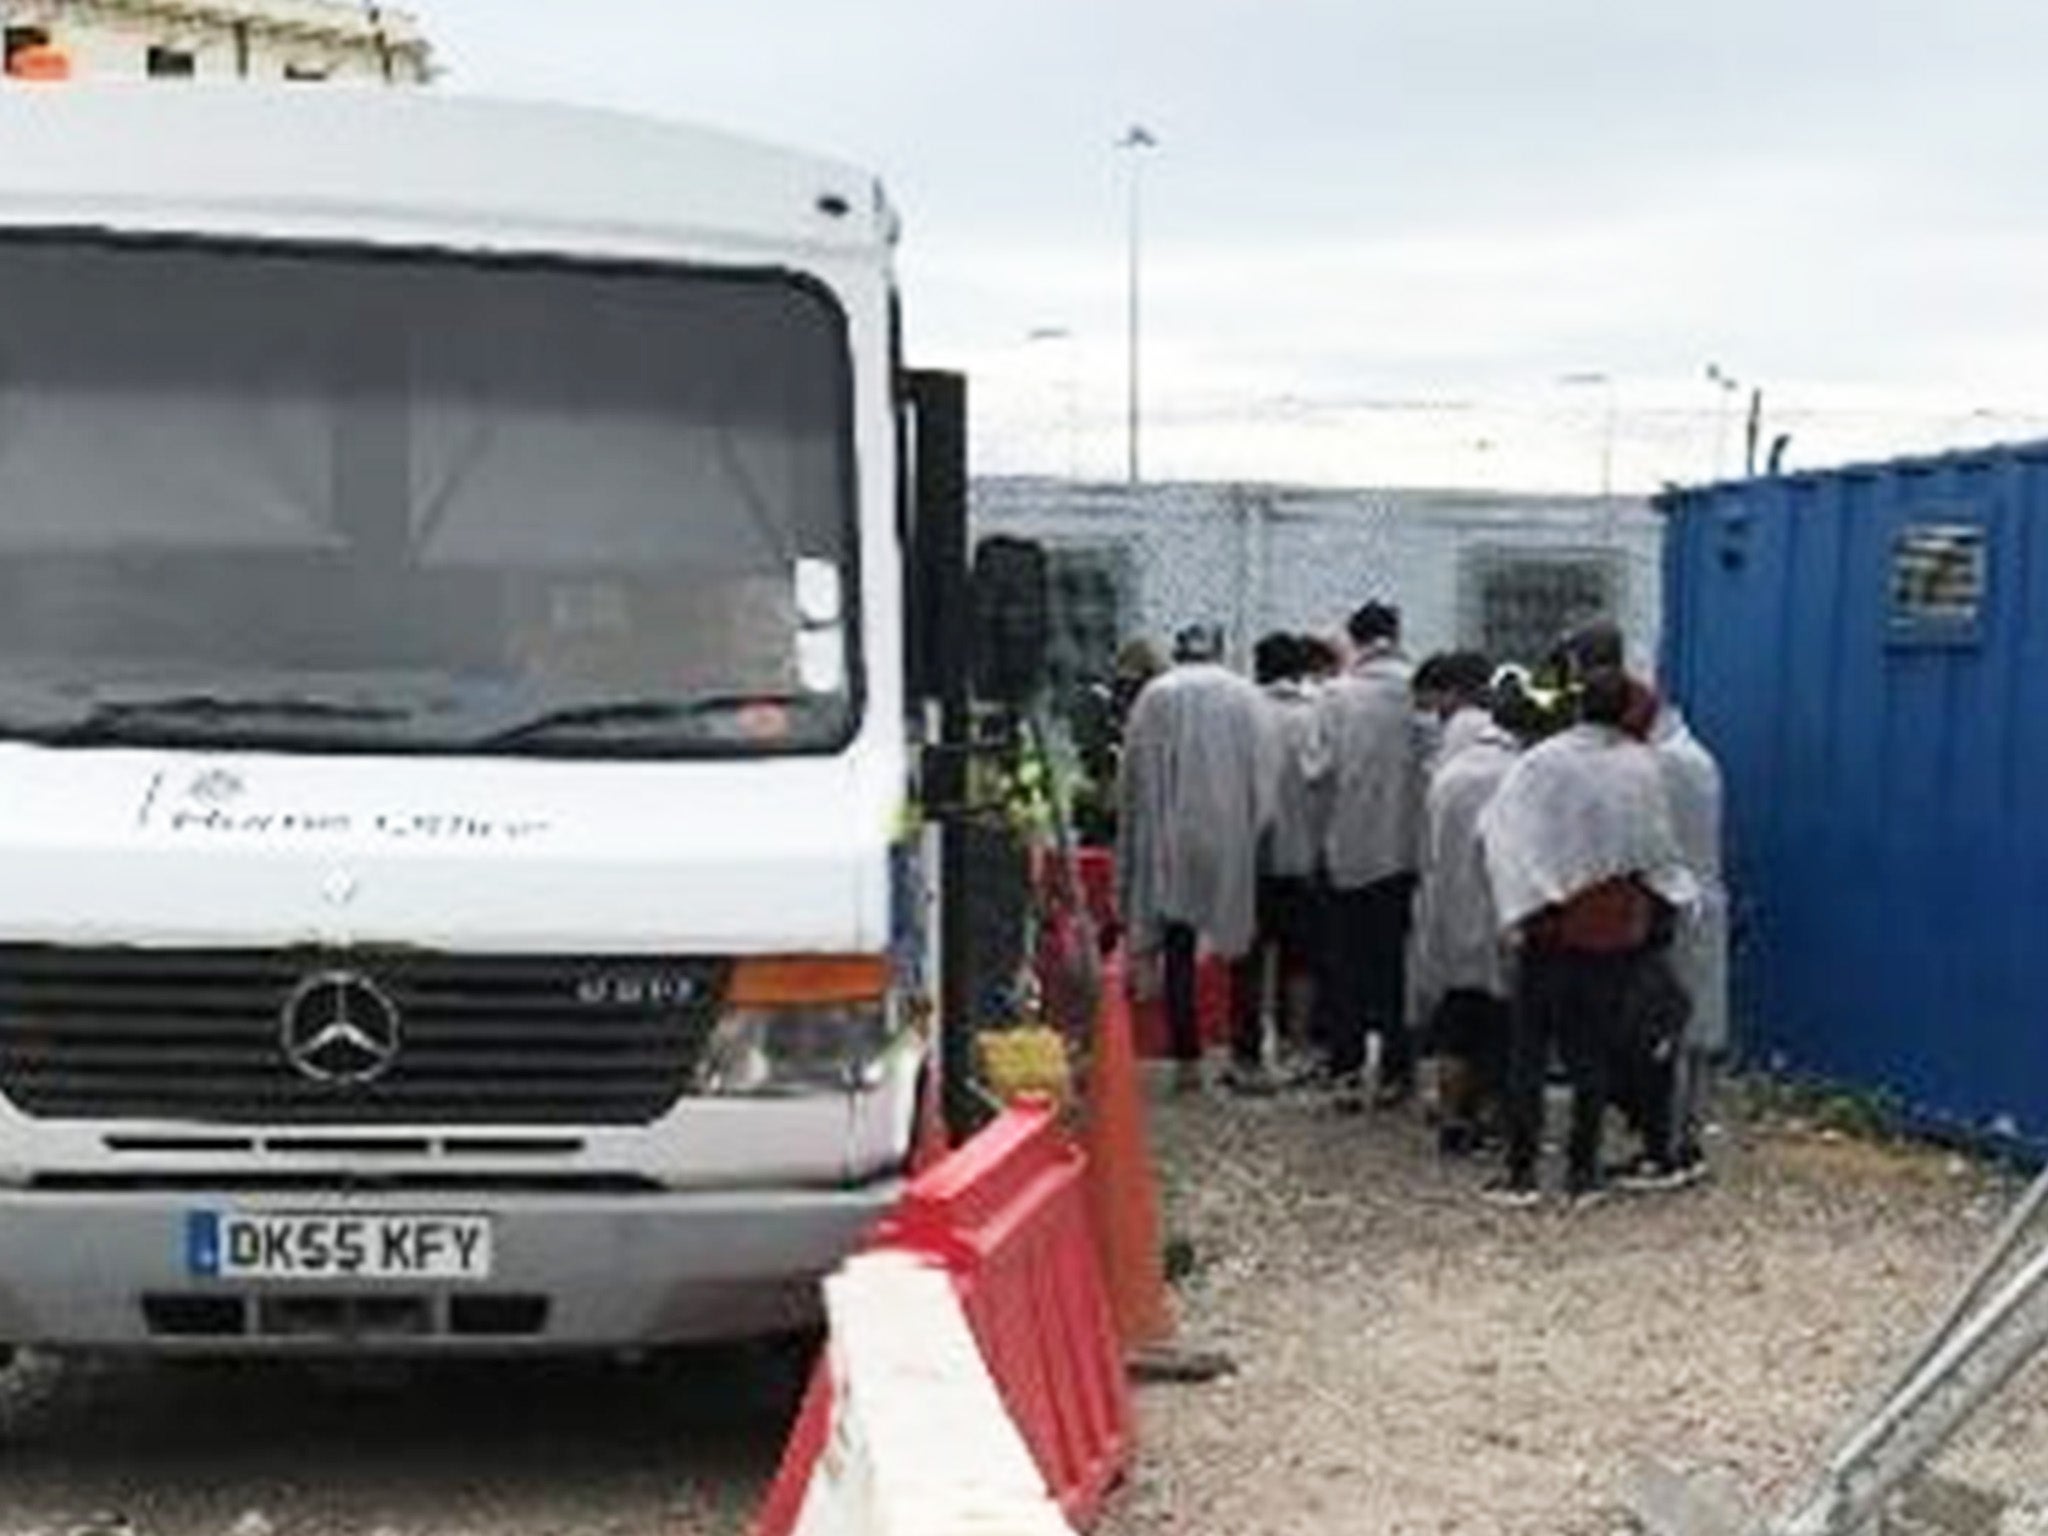 Tug Haven facility was found ‘unsuitable’ for holding high number of migrants